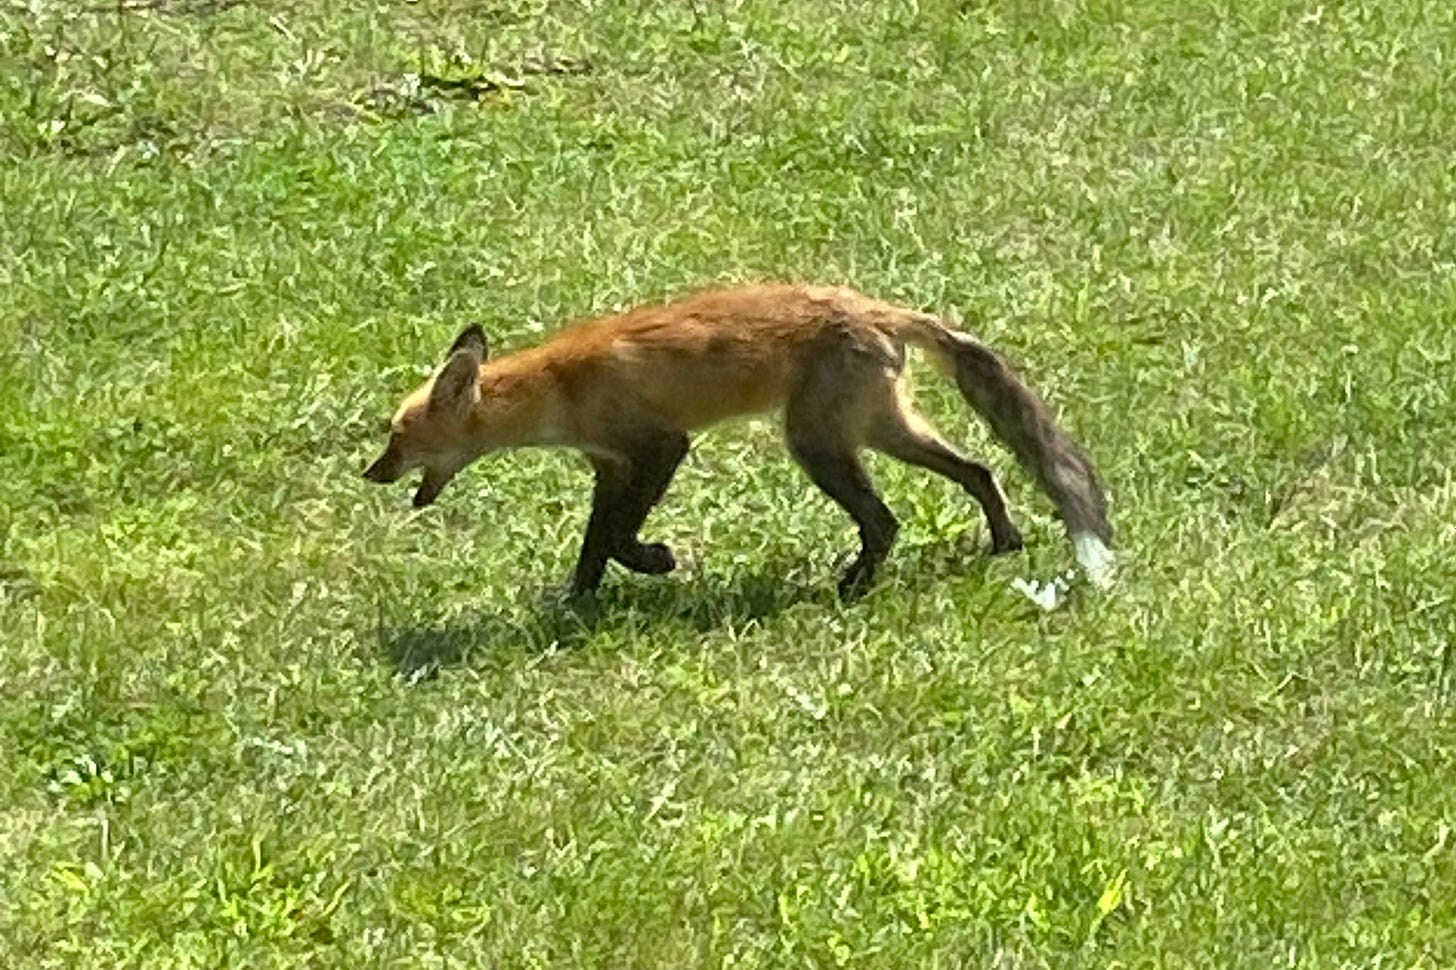 The fox lopes across a lawn with its mouth open